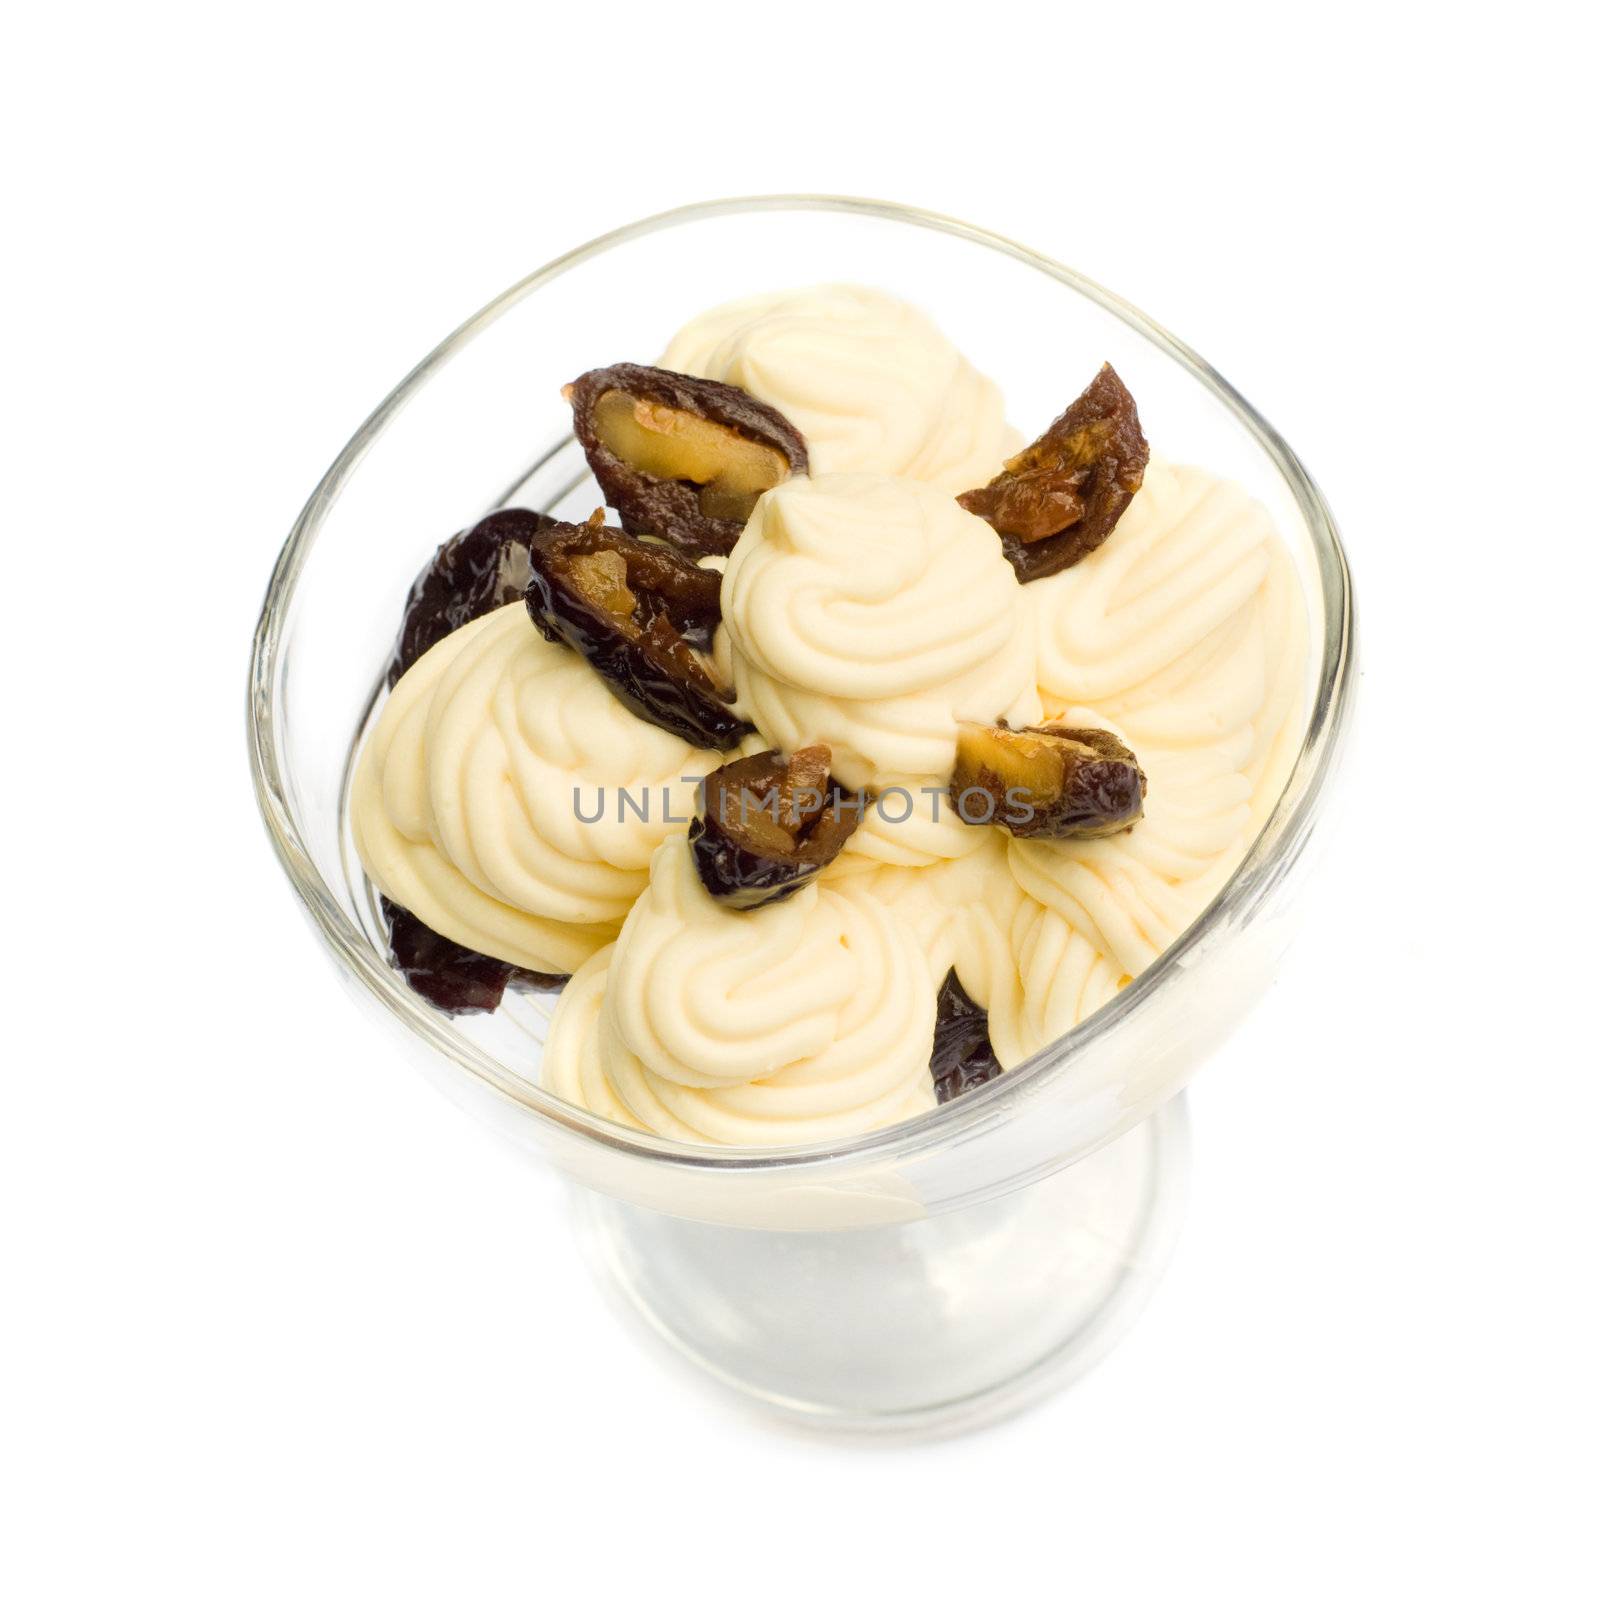 prunes stuffed with walnuts and almonds, in sweet cream, isolated on white